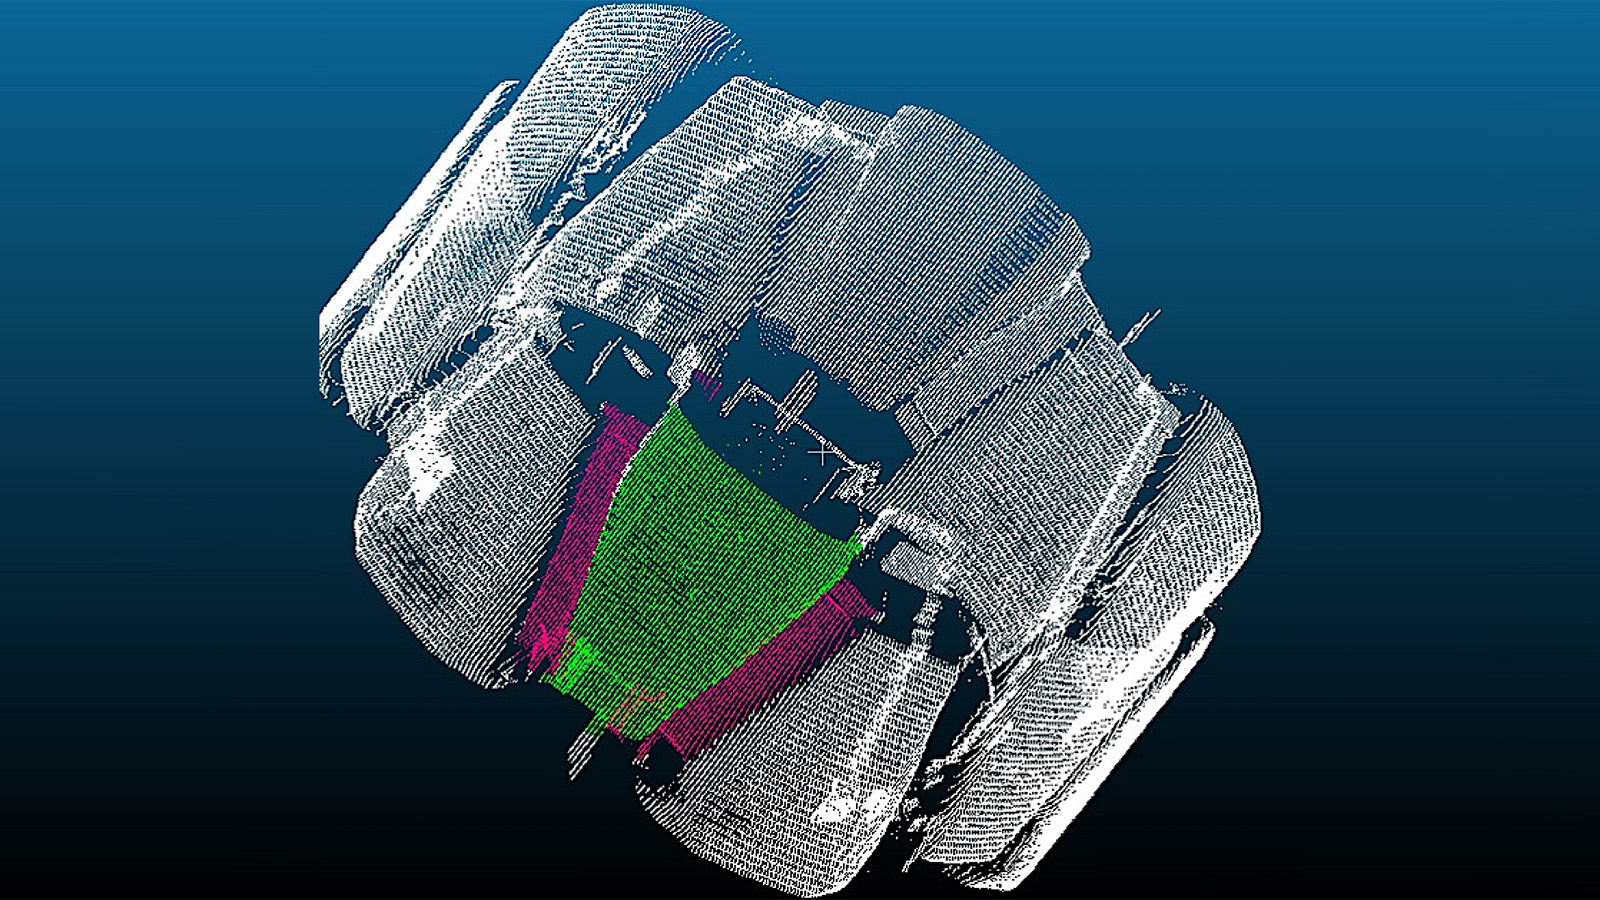 3D point cloud of electric vehicle rotor.